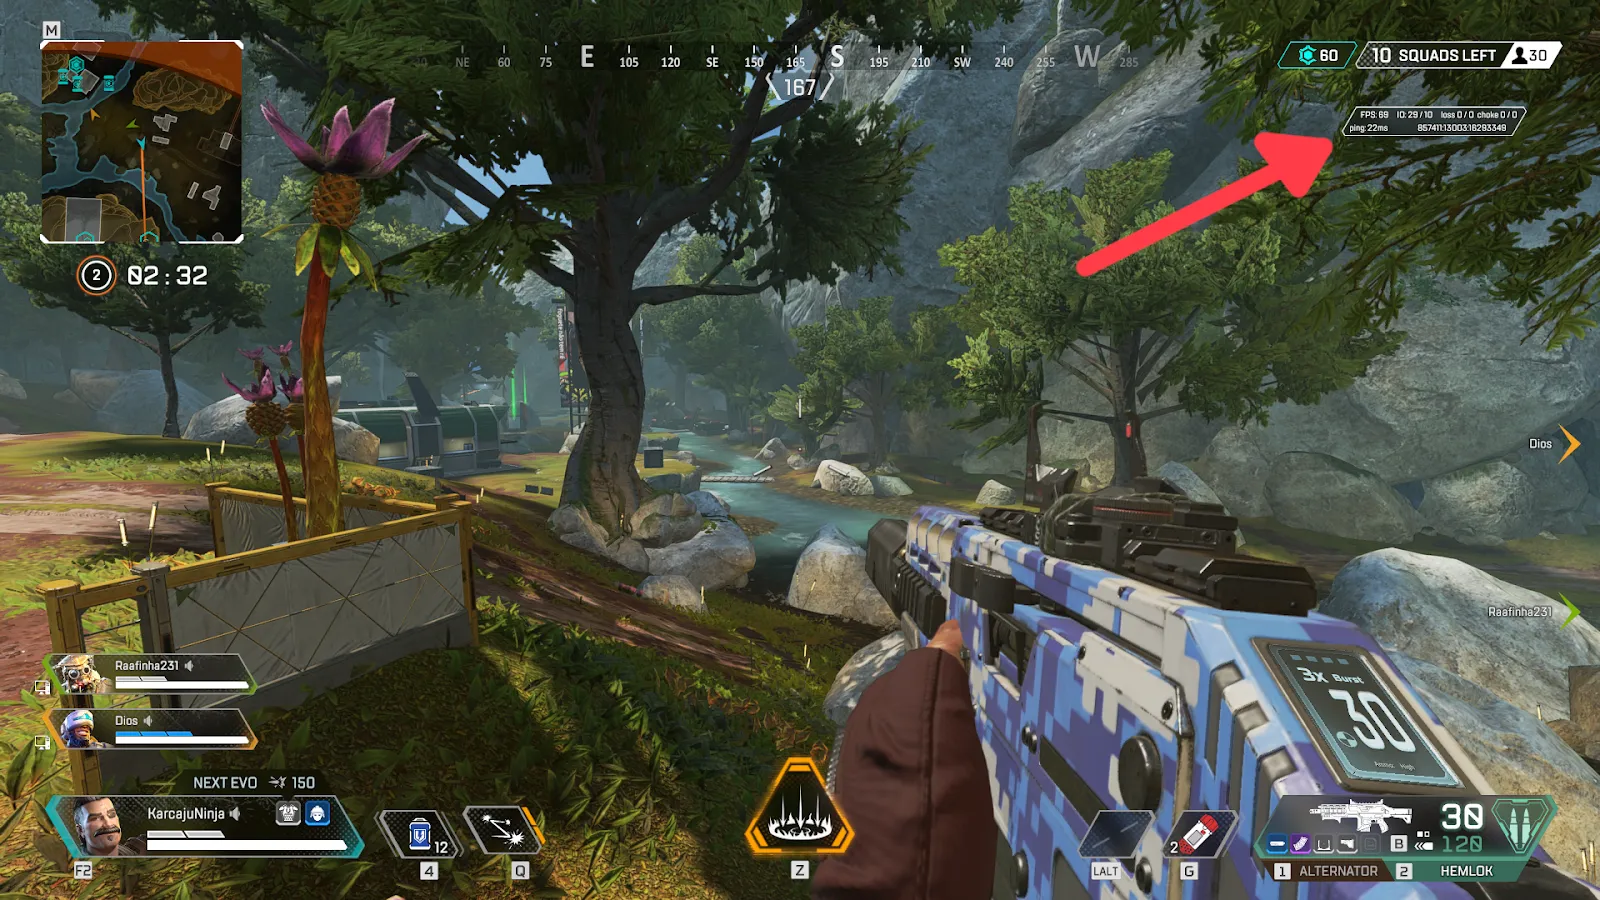 Apex Legends Ping ingame demostration image